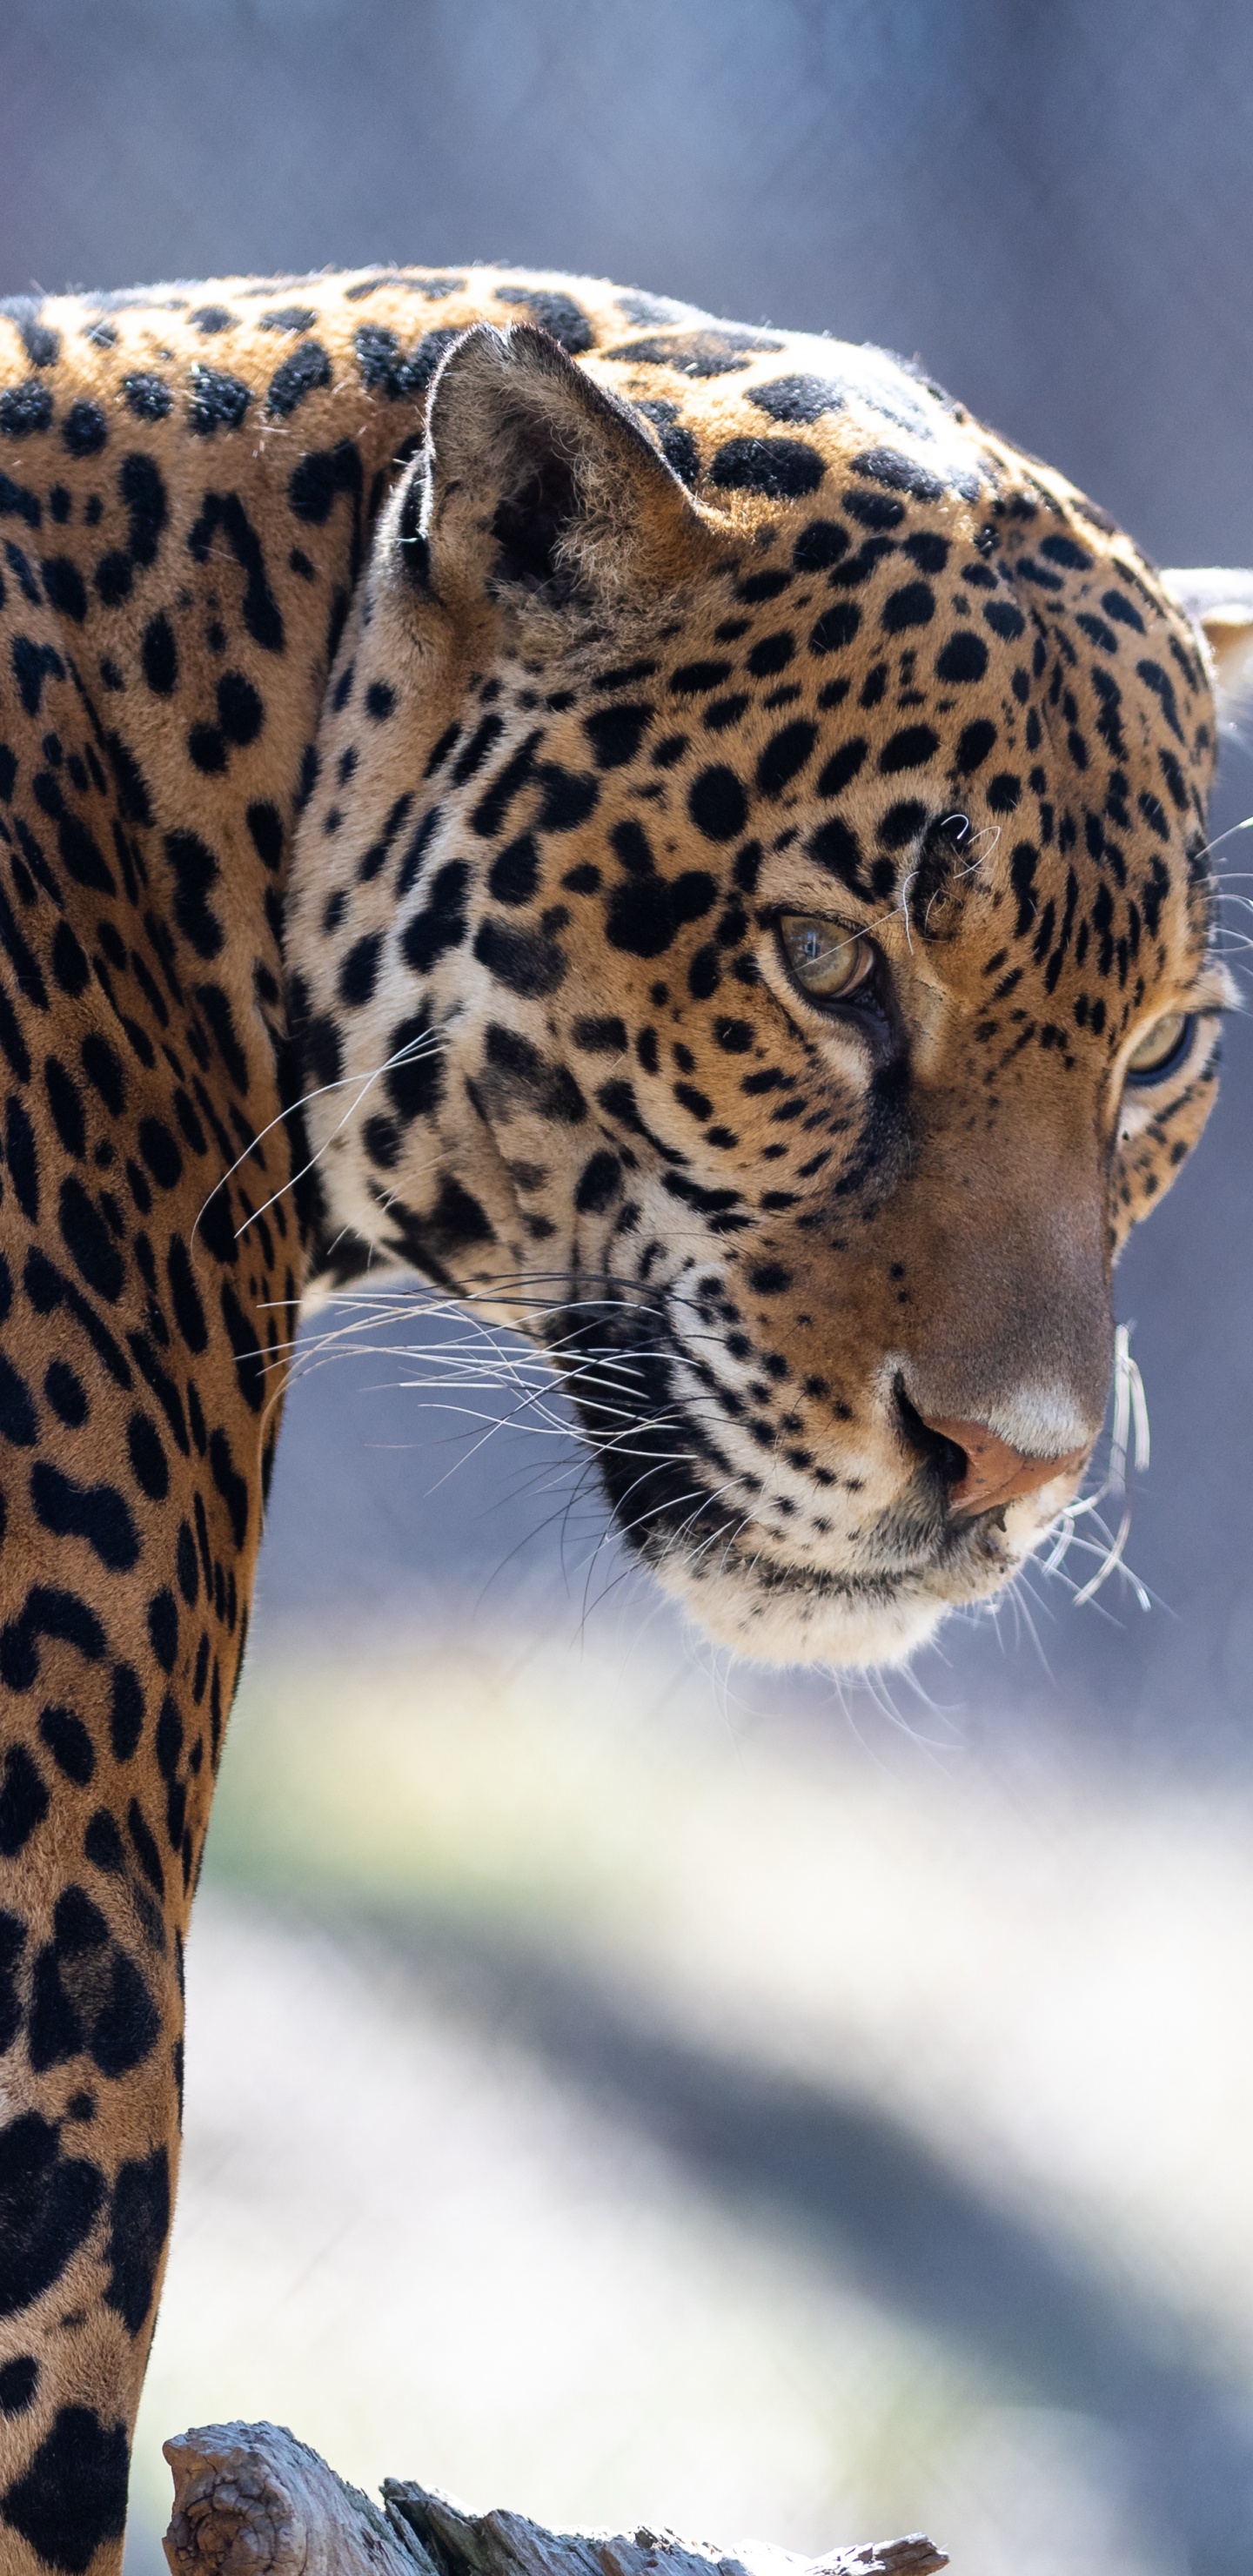 Brown and Black Leopard in Close up Photography. Wallpaper in 1440x2960 Resolution